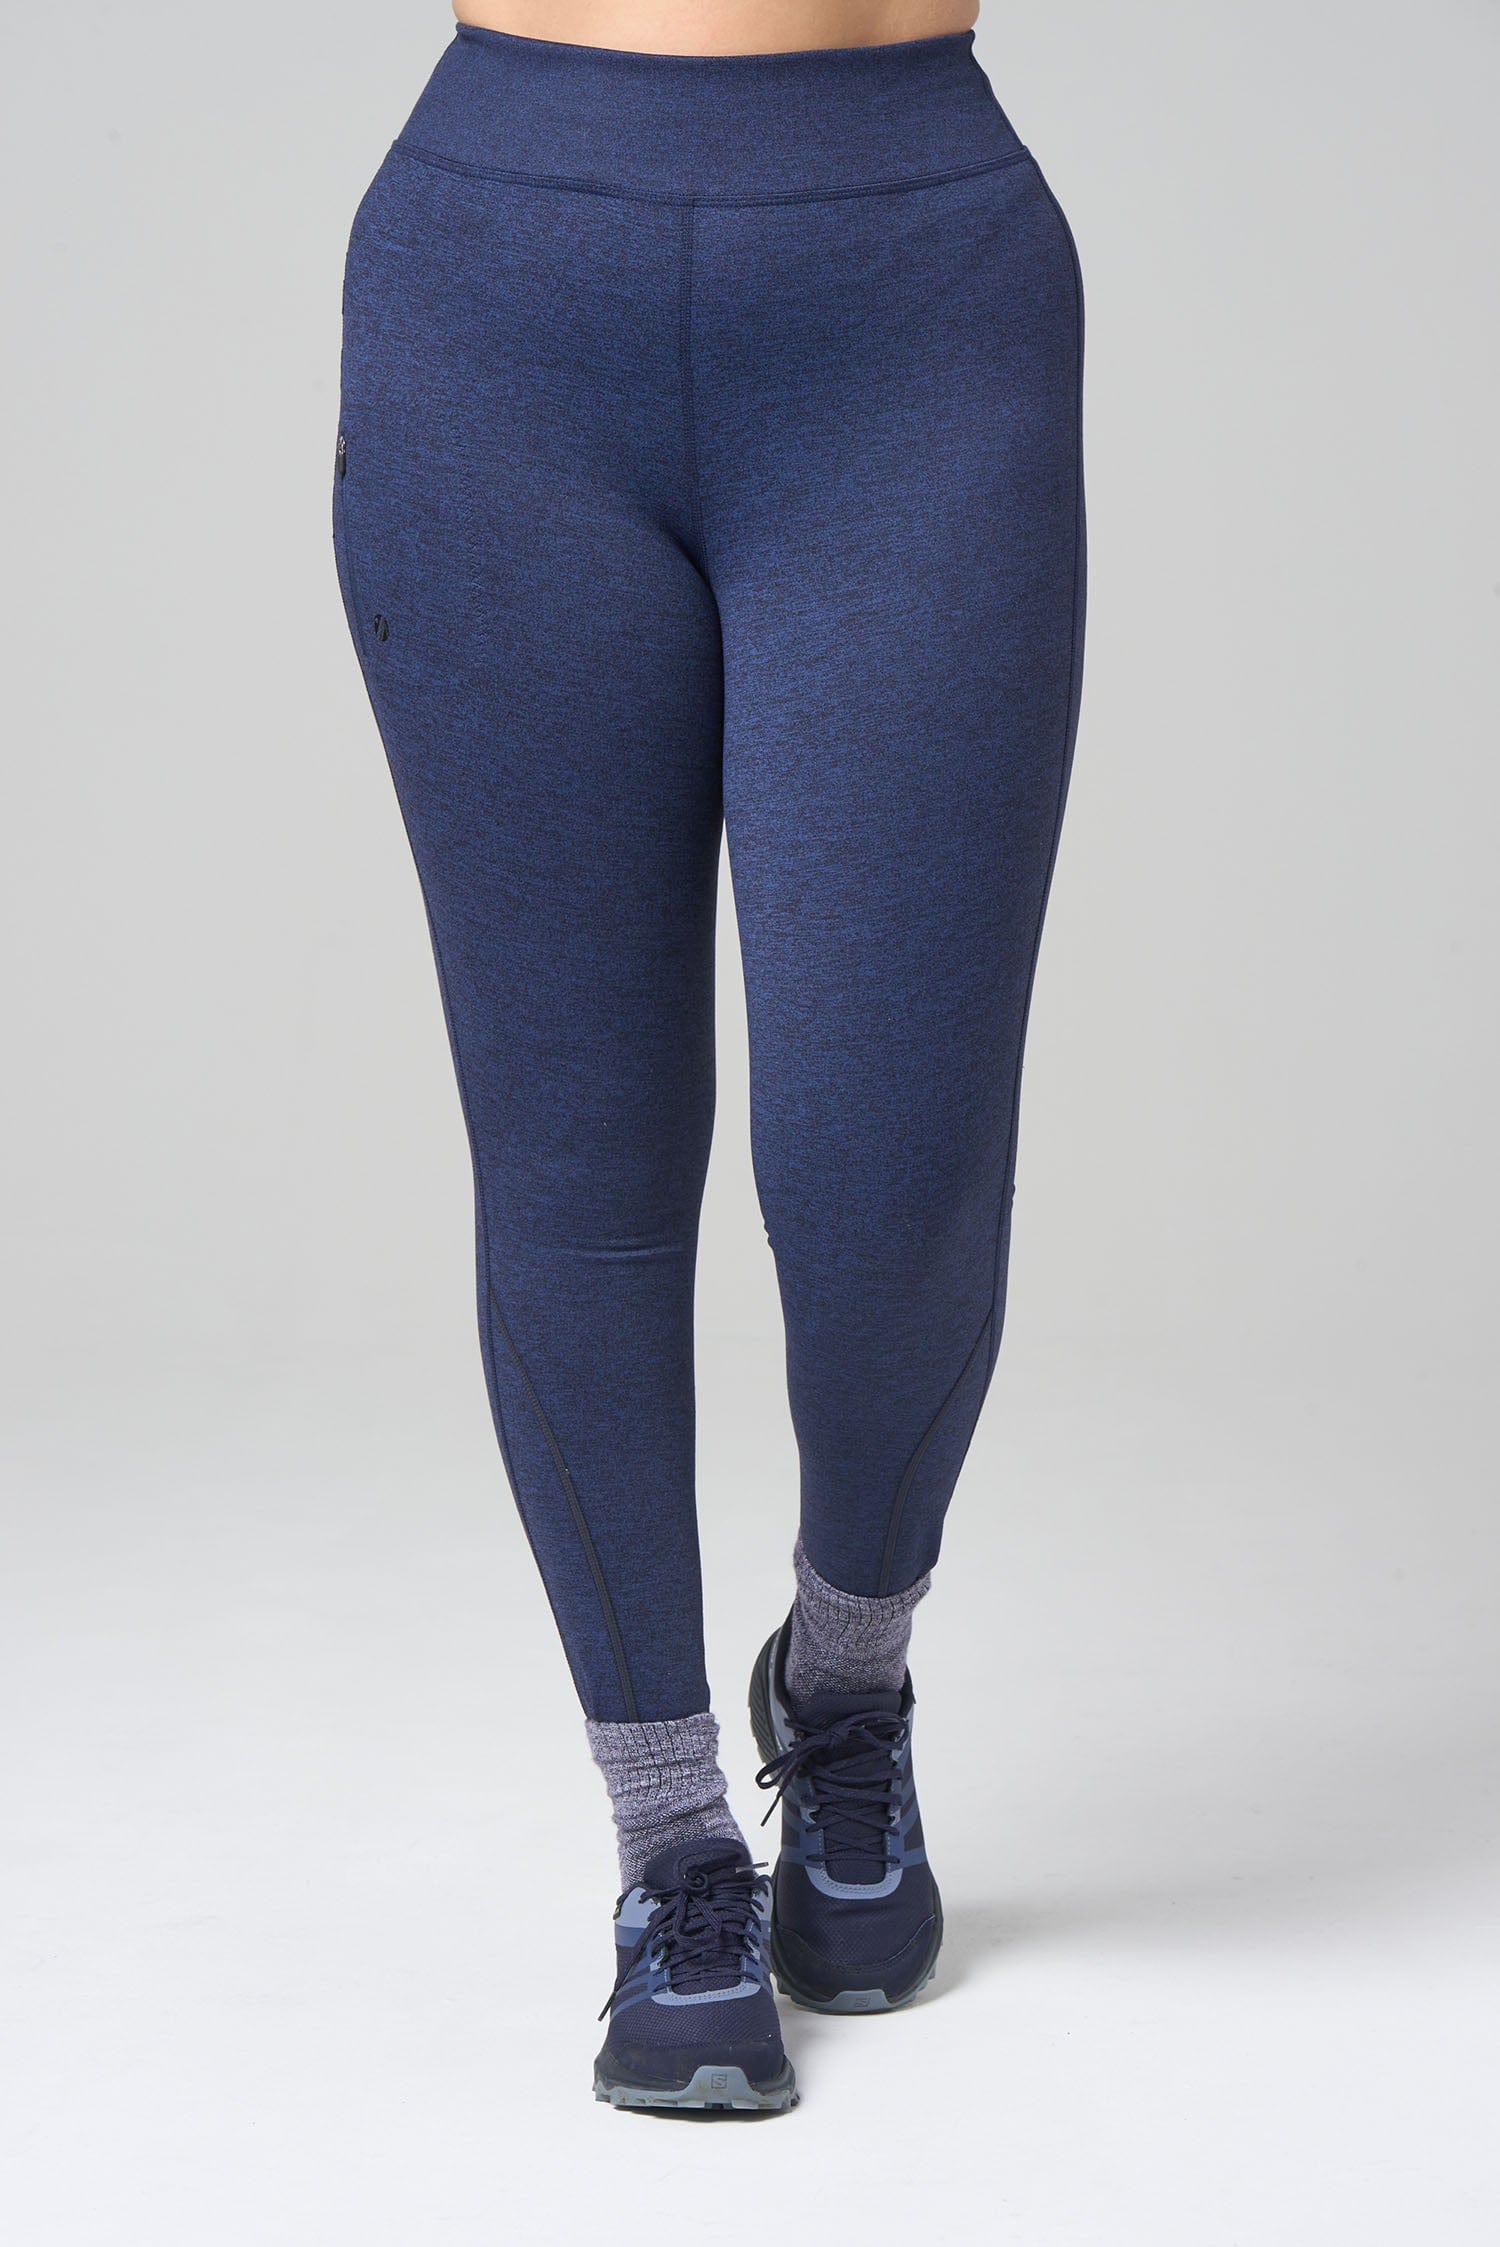 Buy Navy 2 Pack Thermal Leggings from Next Poland